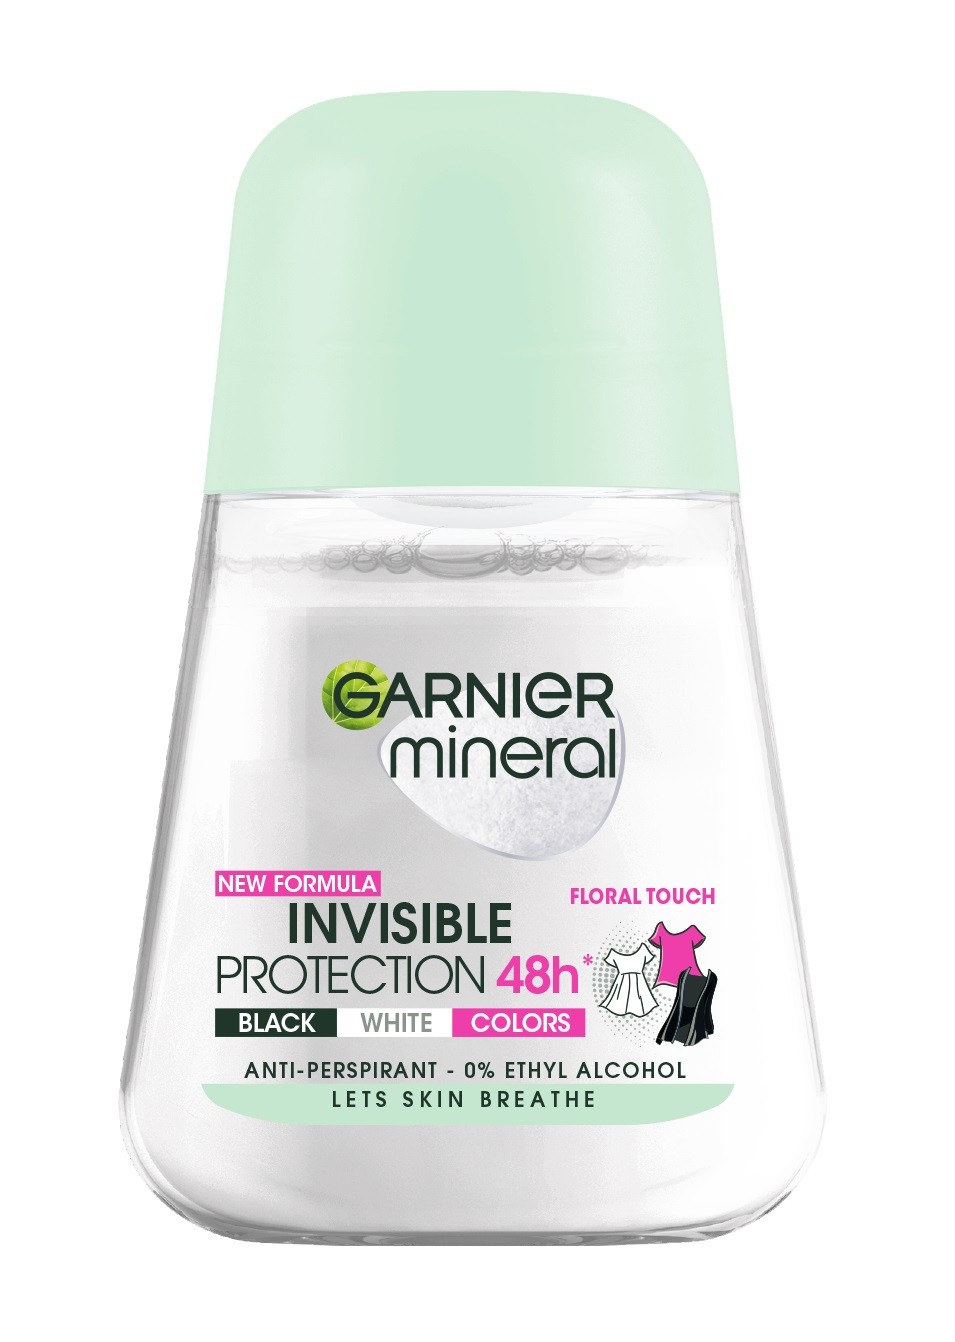 Garnier Mineral Dezodorant roll-on Invisible Protection 48h Floral Touch - Black,White,Colors   50ml